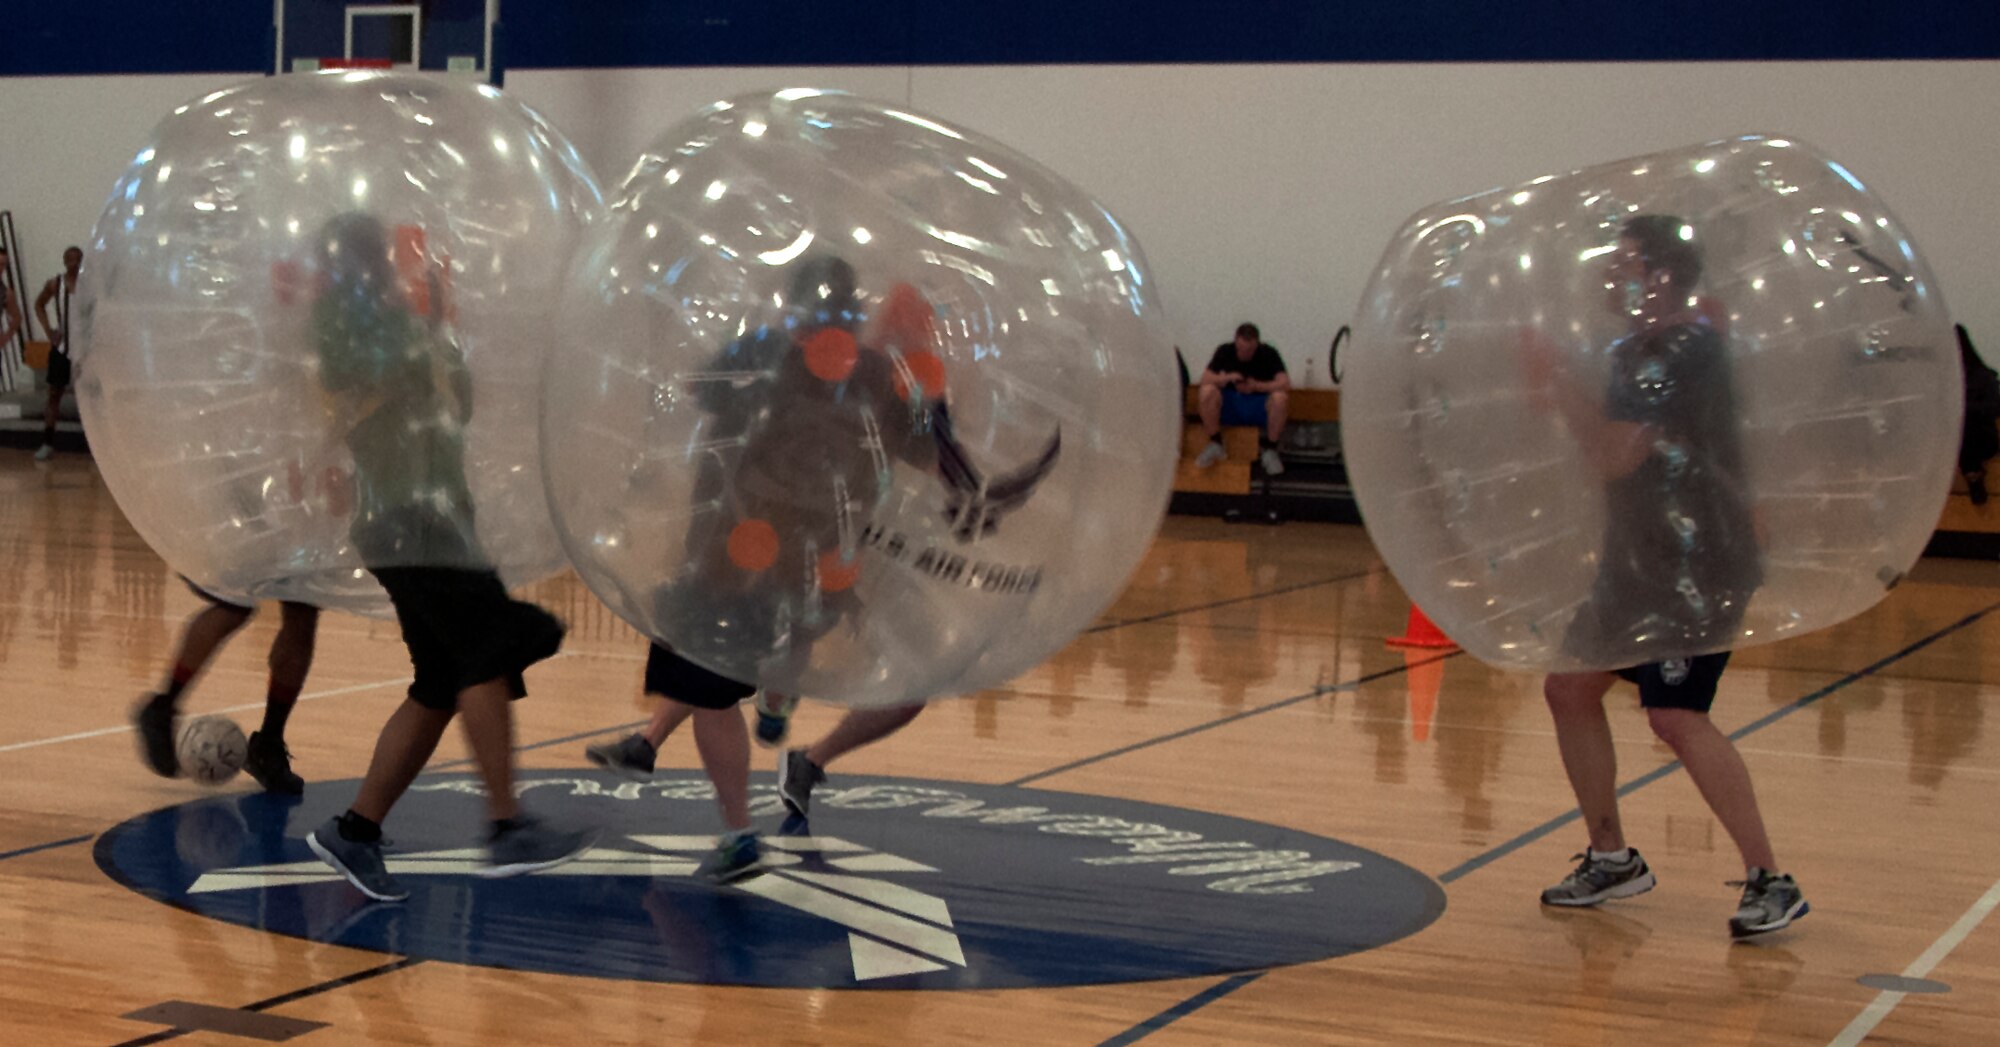 A group of Airmen collide during the start of a bubble soccer game April 22, 2016, during a tournament inside the Freedom Hall Fitness Center on F.E. Warren Air Force Base, Wyo. Teamwork was key as teams tried to score goals while remaining upright. (U.S. Air Force photo by Senior Airman Brandon Valle) 